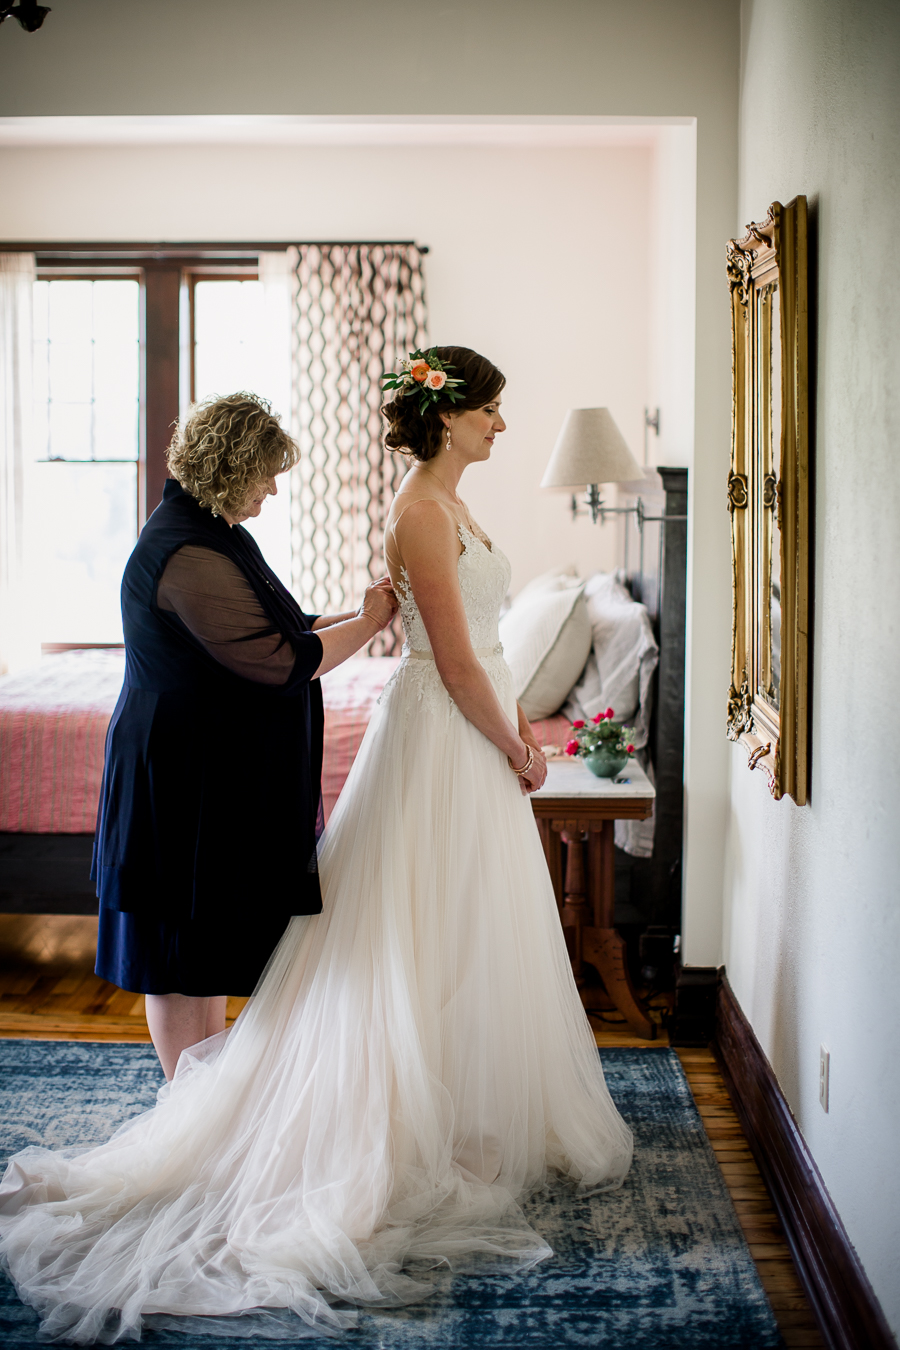 Mother of Bride helping with dress at this North Carolina Elopement by Knoxville Wedding Photographer, Amanda May Photos.